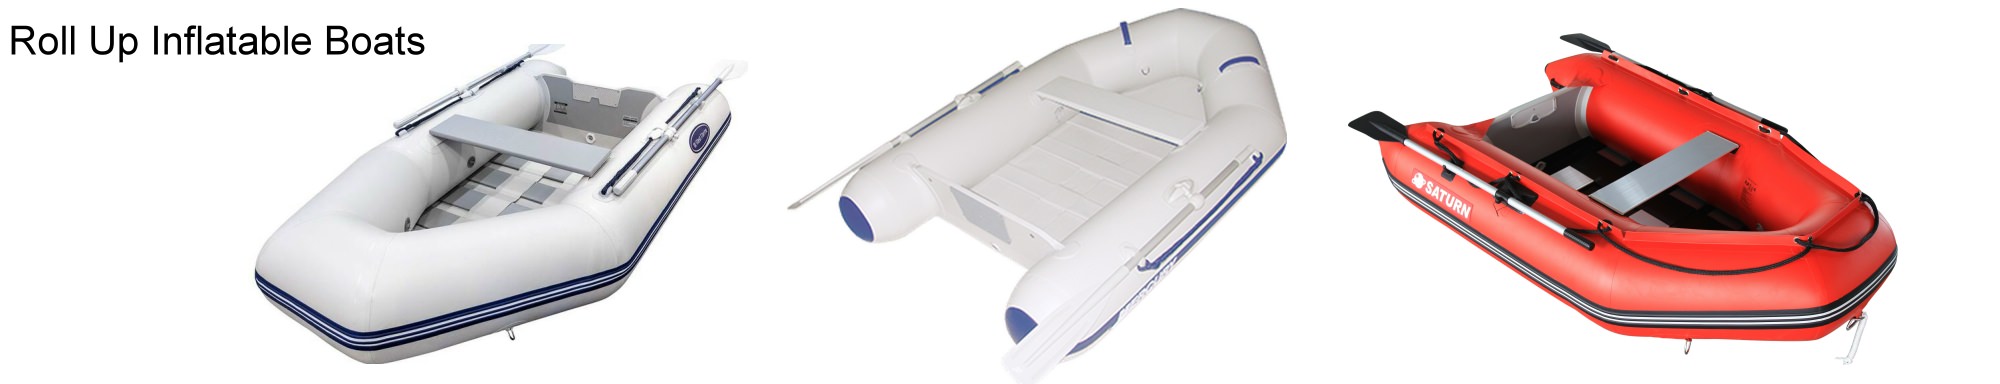 roll up inflatable boats